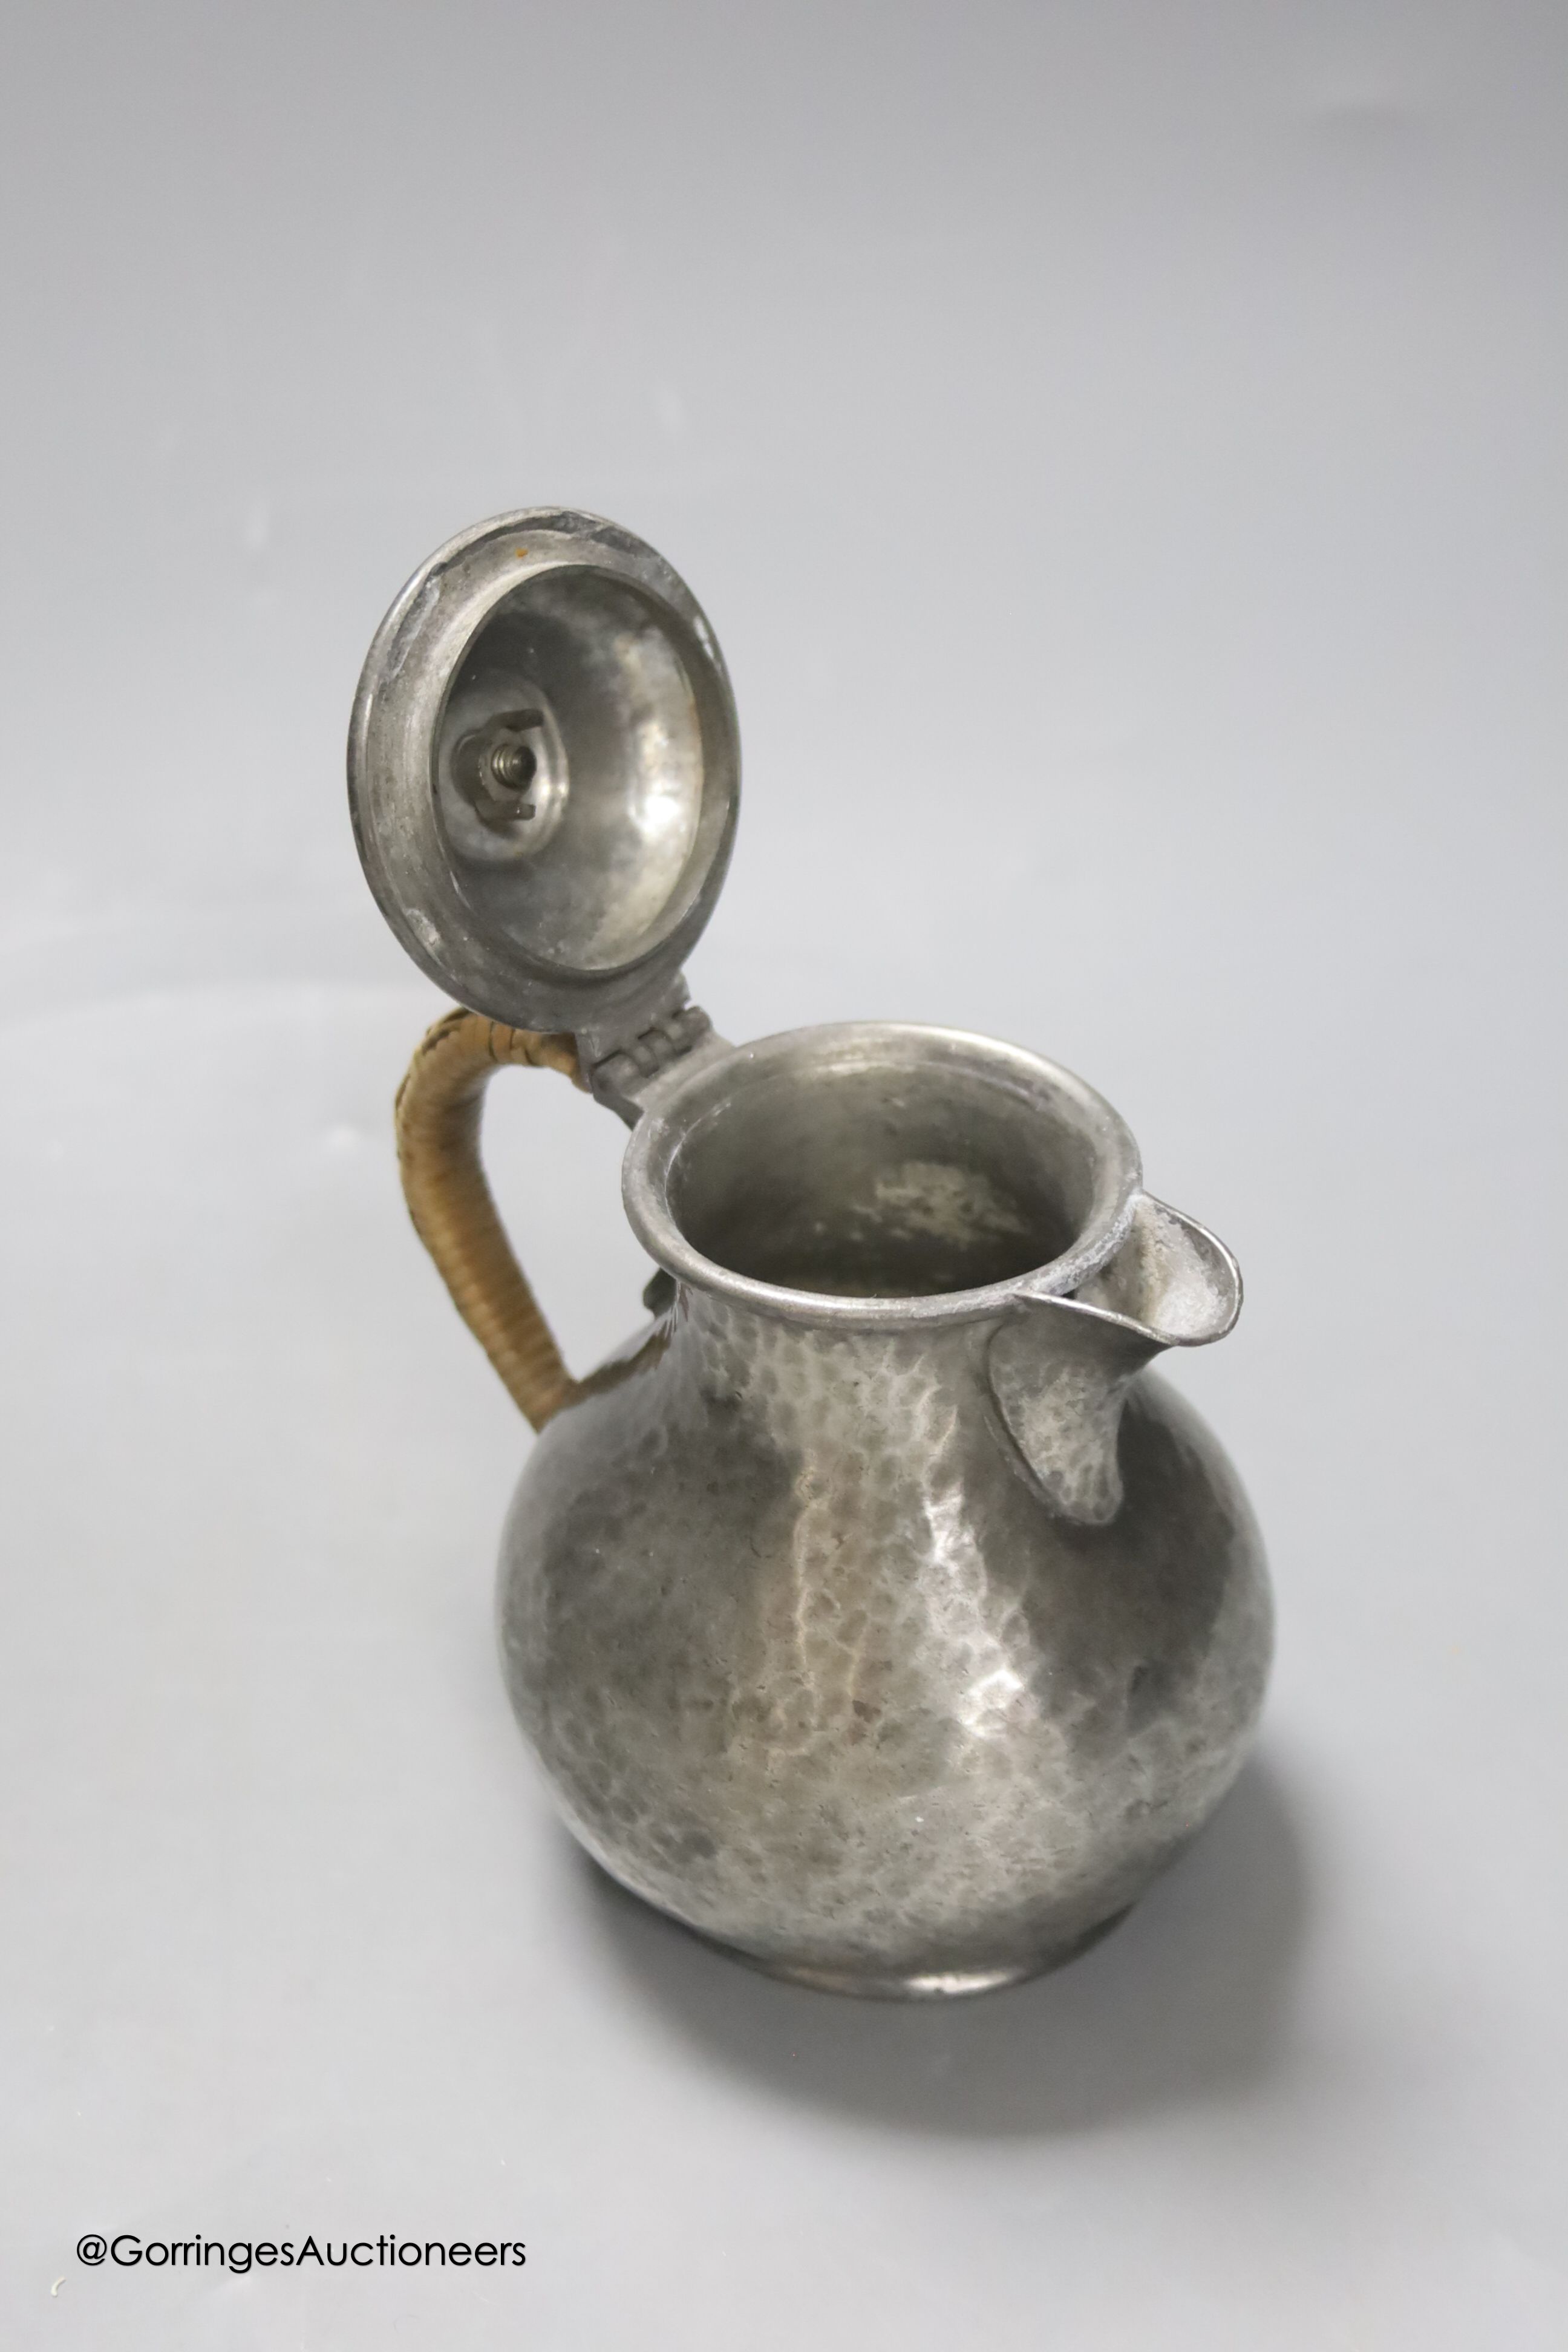 A Liberty & Co Tudric pewter pin dish, a Tudric covered jug and a pewter candleholder